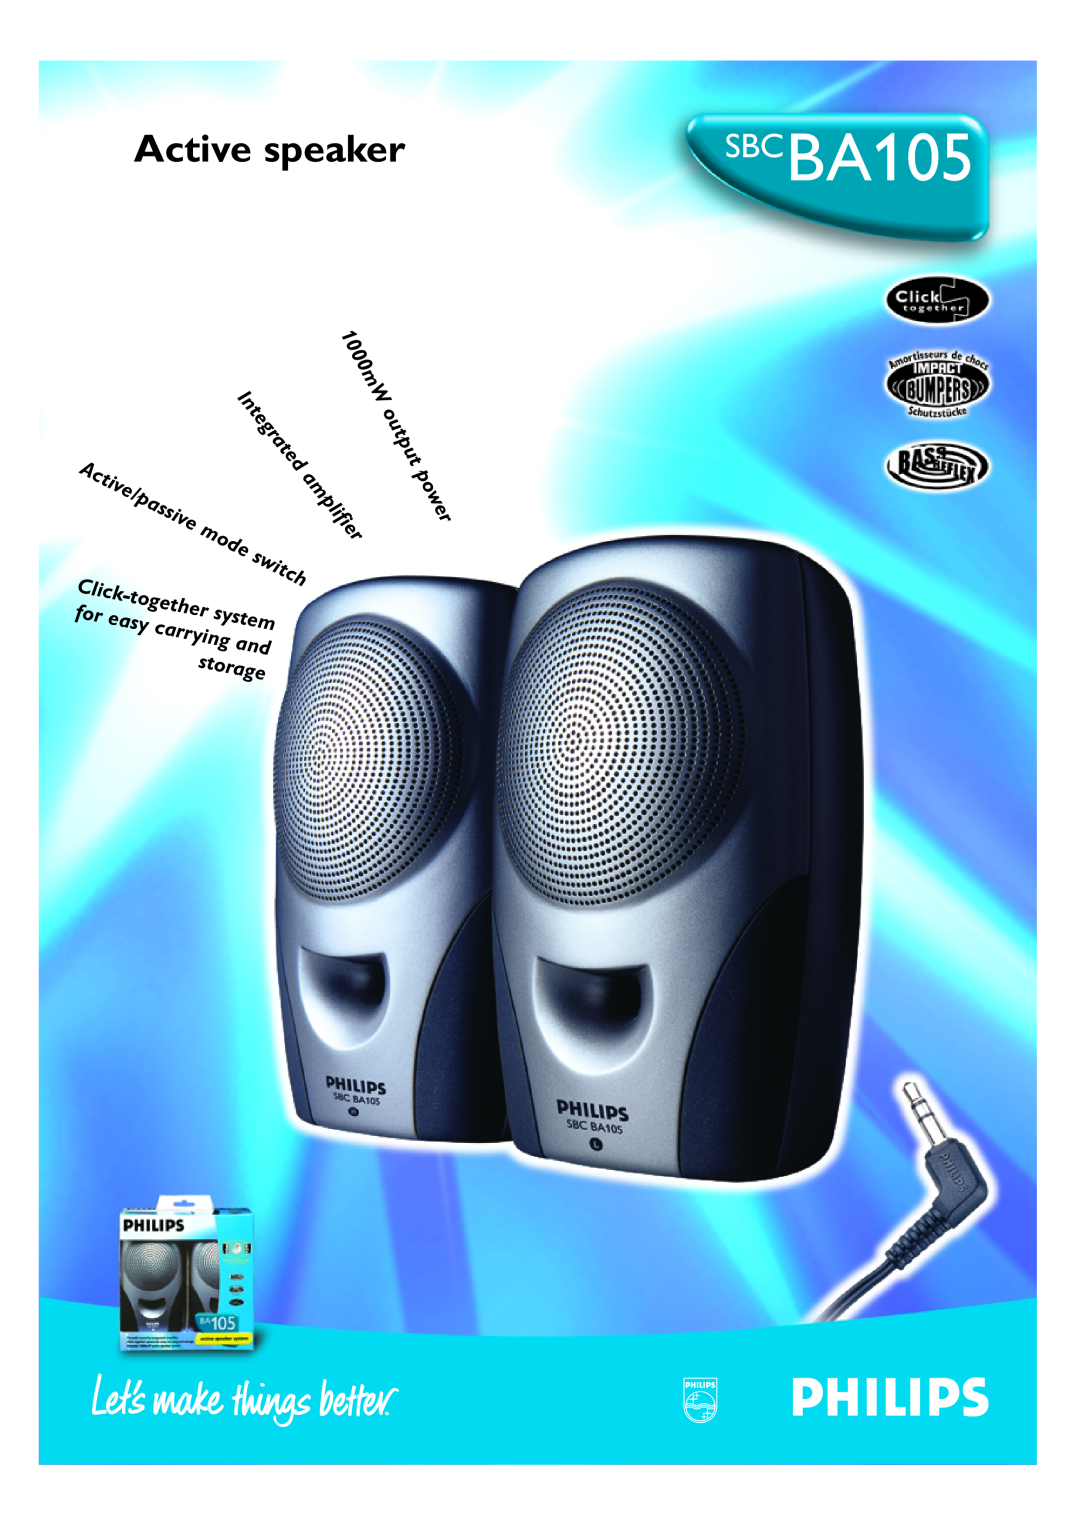 Philips SBCBA105 manual Active speaker, Integrated, 1000mW, output, switch, power, Click, carrying, storage, amplifier 